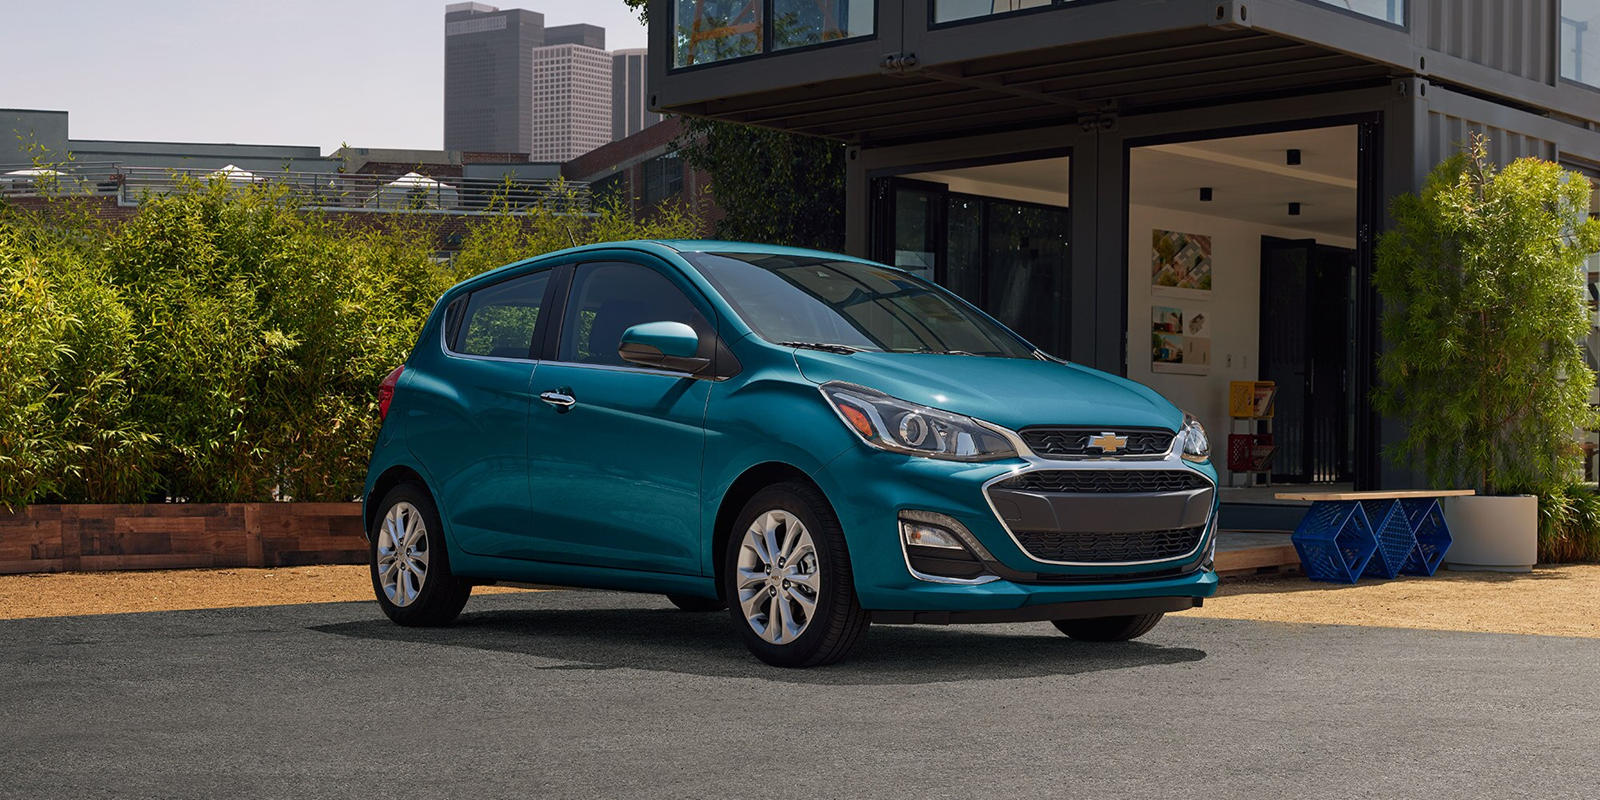 2021 Chevrolet Spark Front Angle View